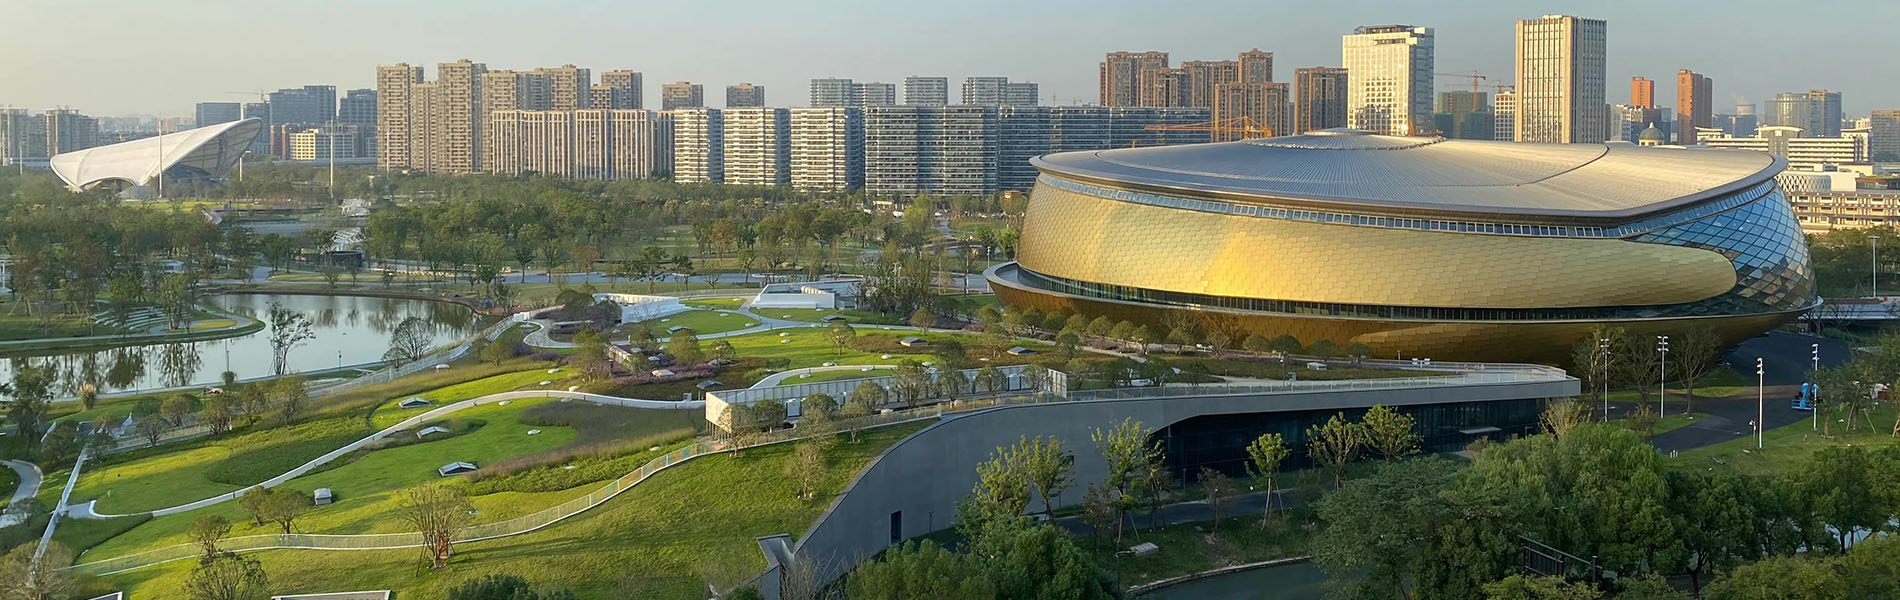 A squat saucer-like gold-clad building surrounded by grassy hills and young trees